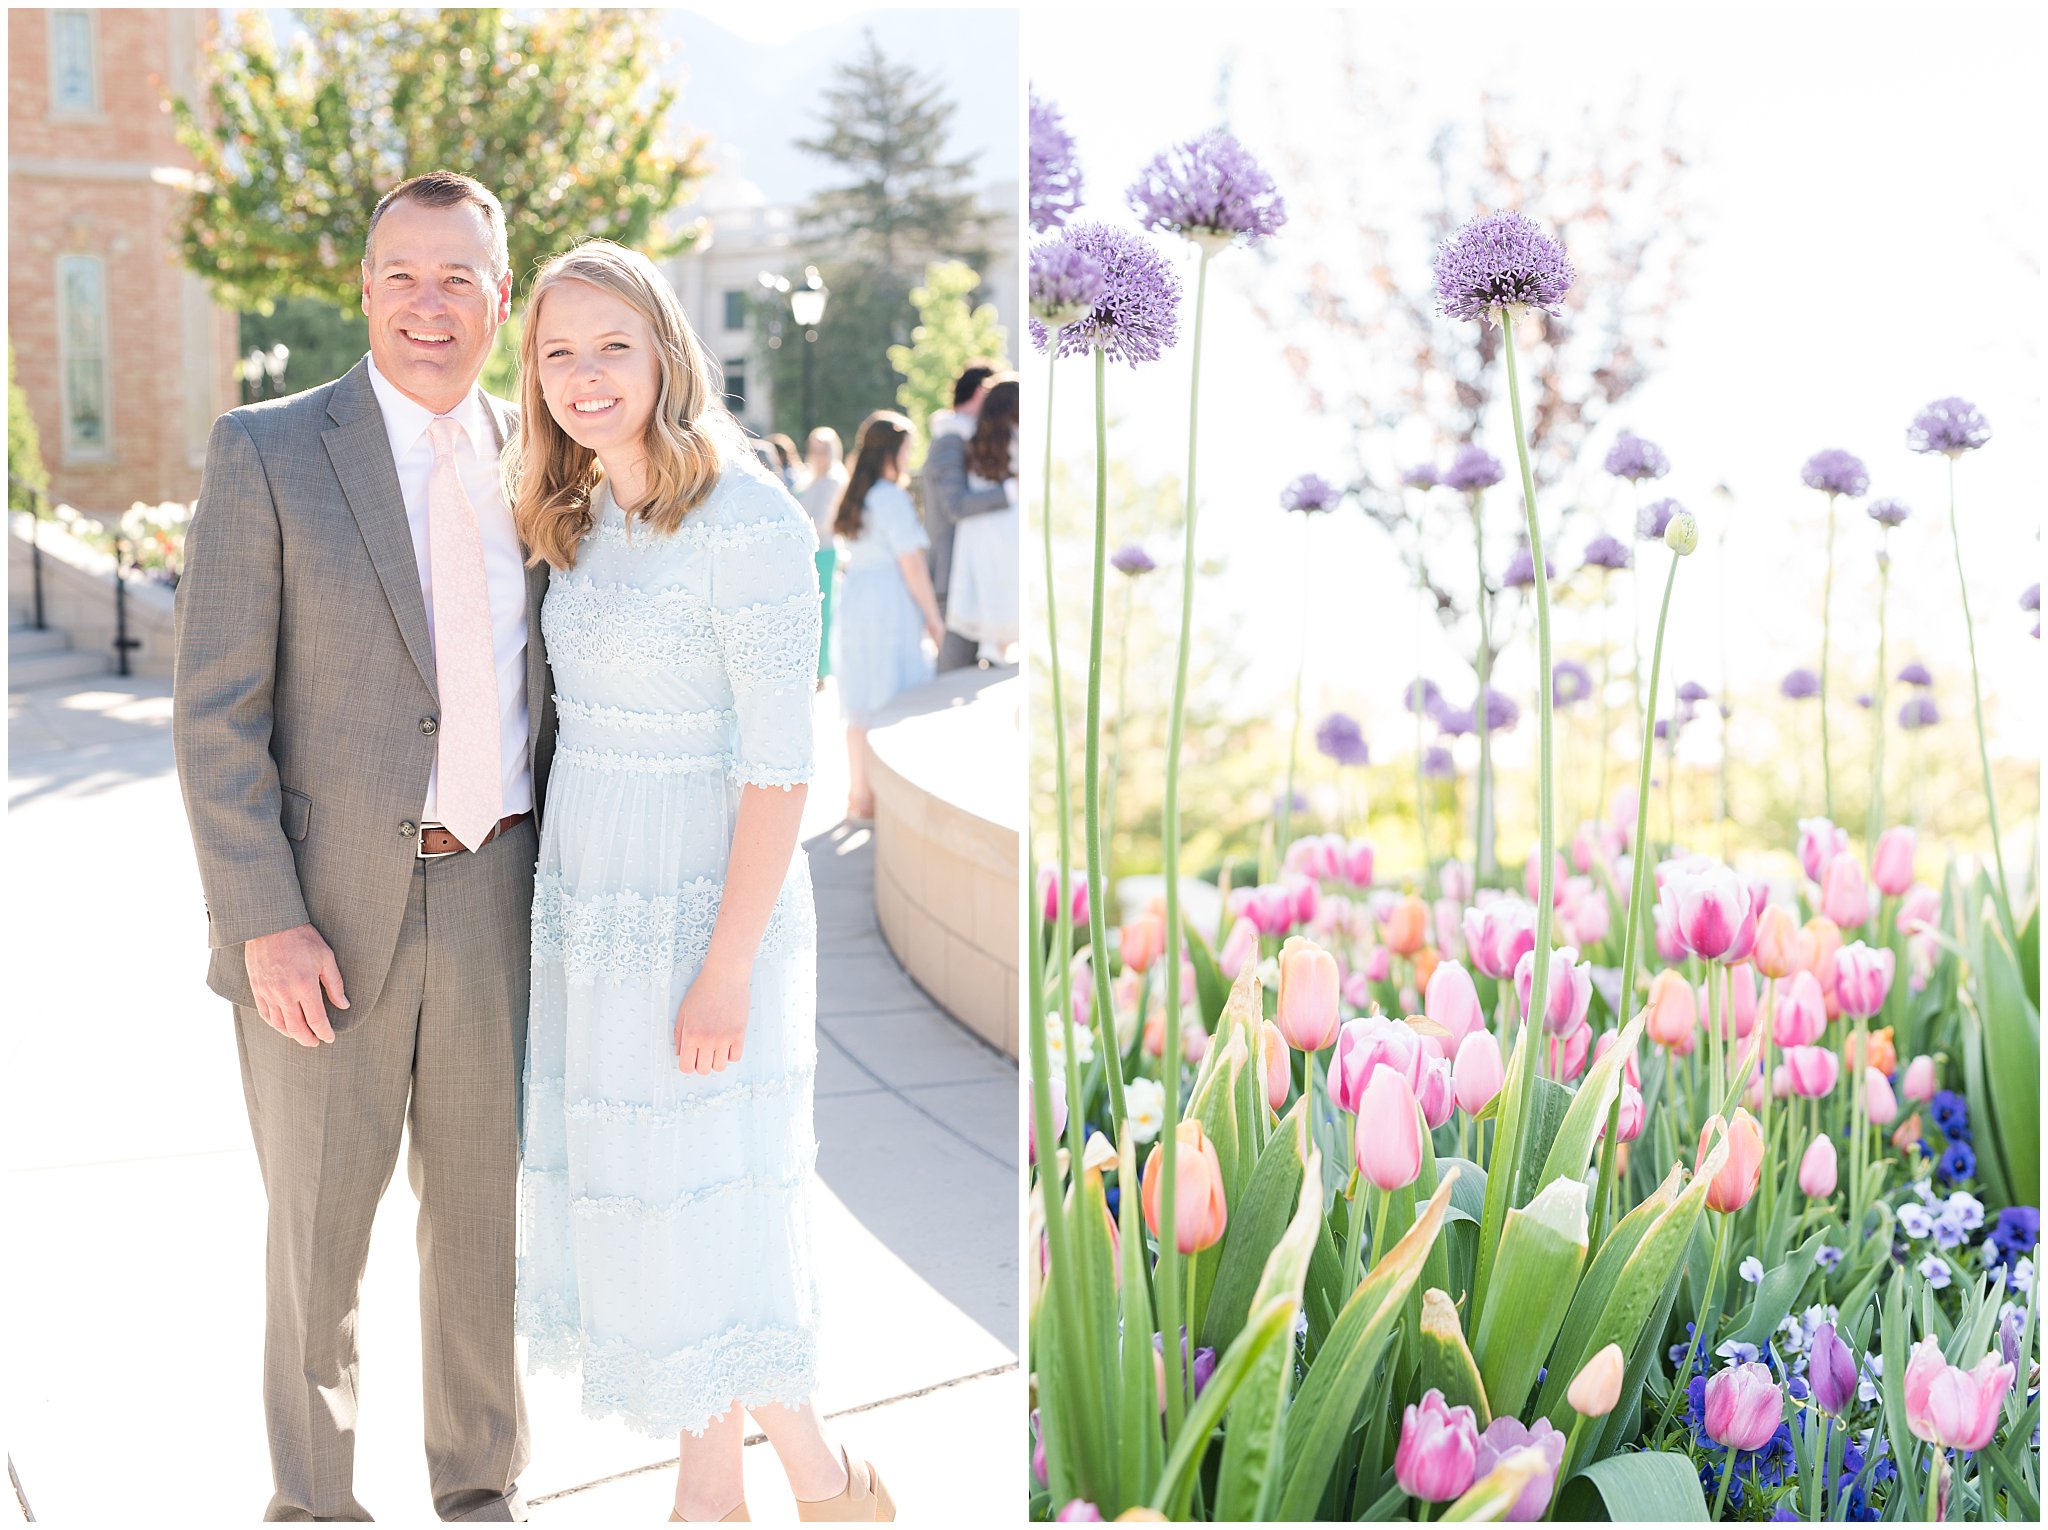 Wedding guests at Provo City Center temple with grey, blush, and light blue wedding colors | Spring Provo City Center Temple Wedding | Utah Wedding Photographers | Jessie and Dallin Photography